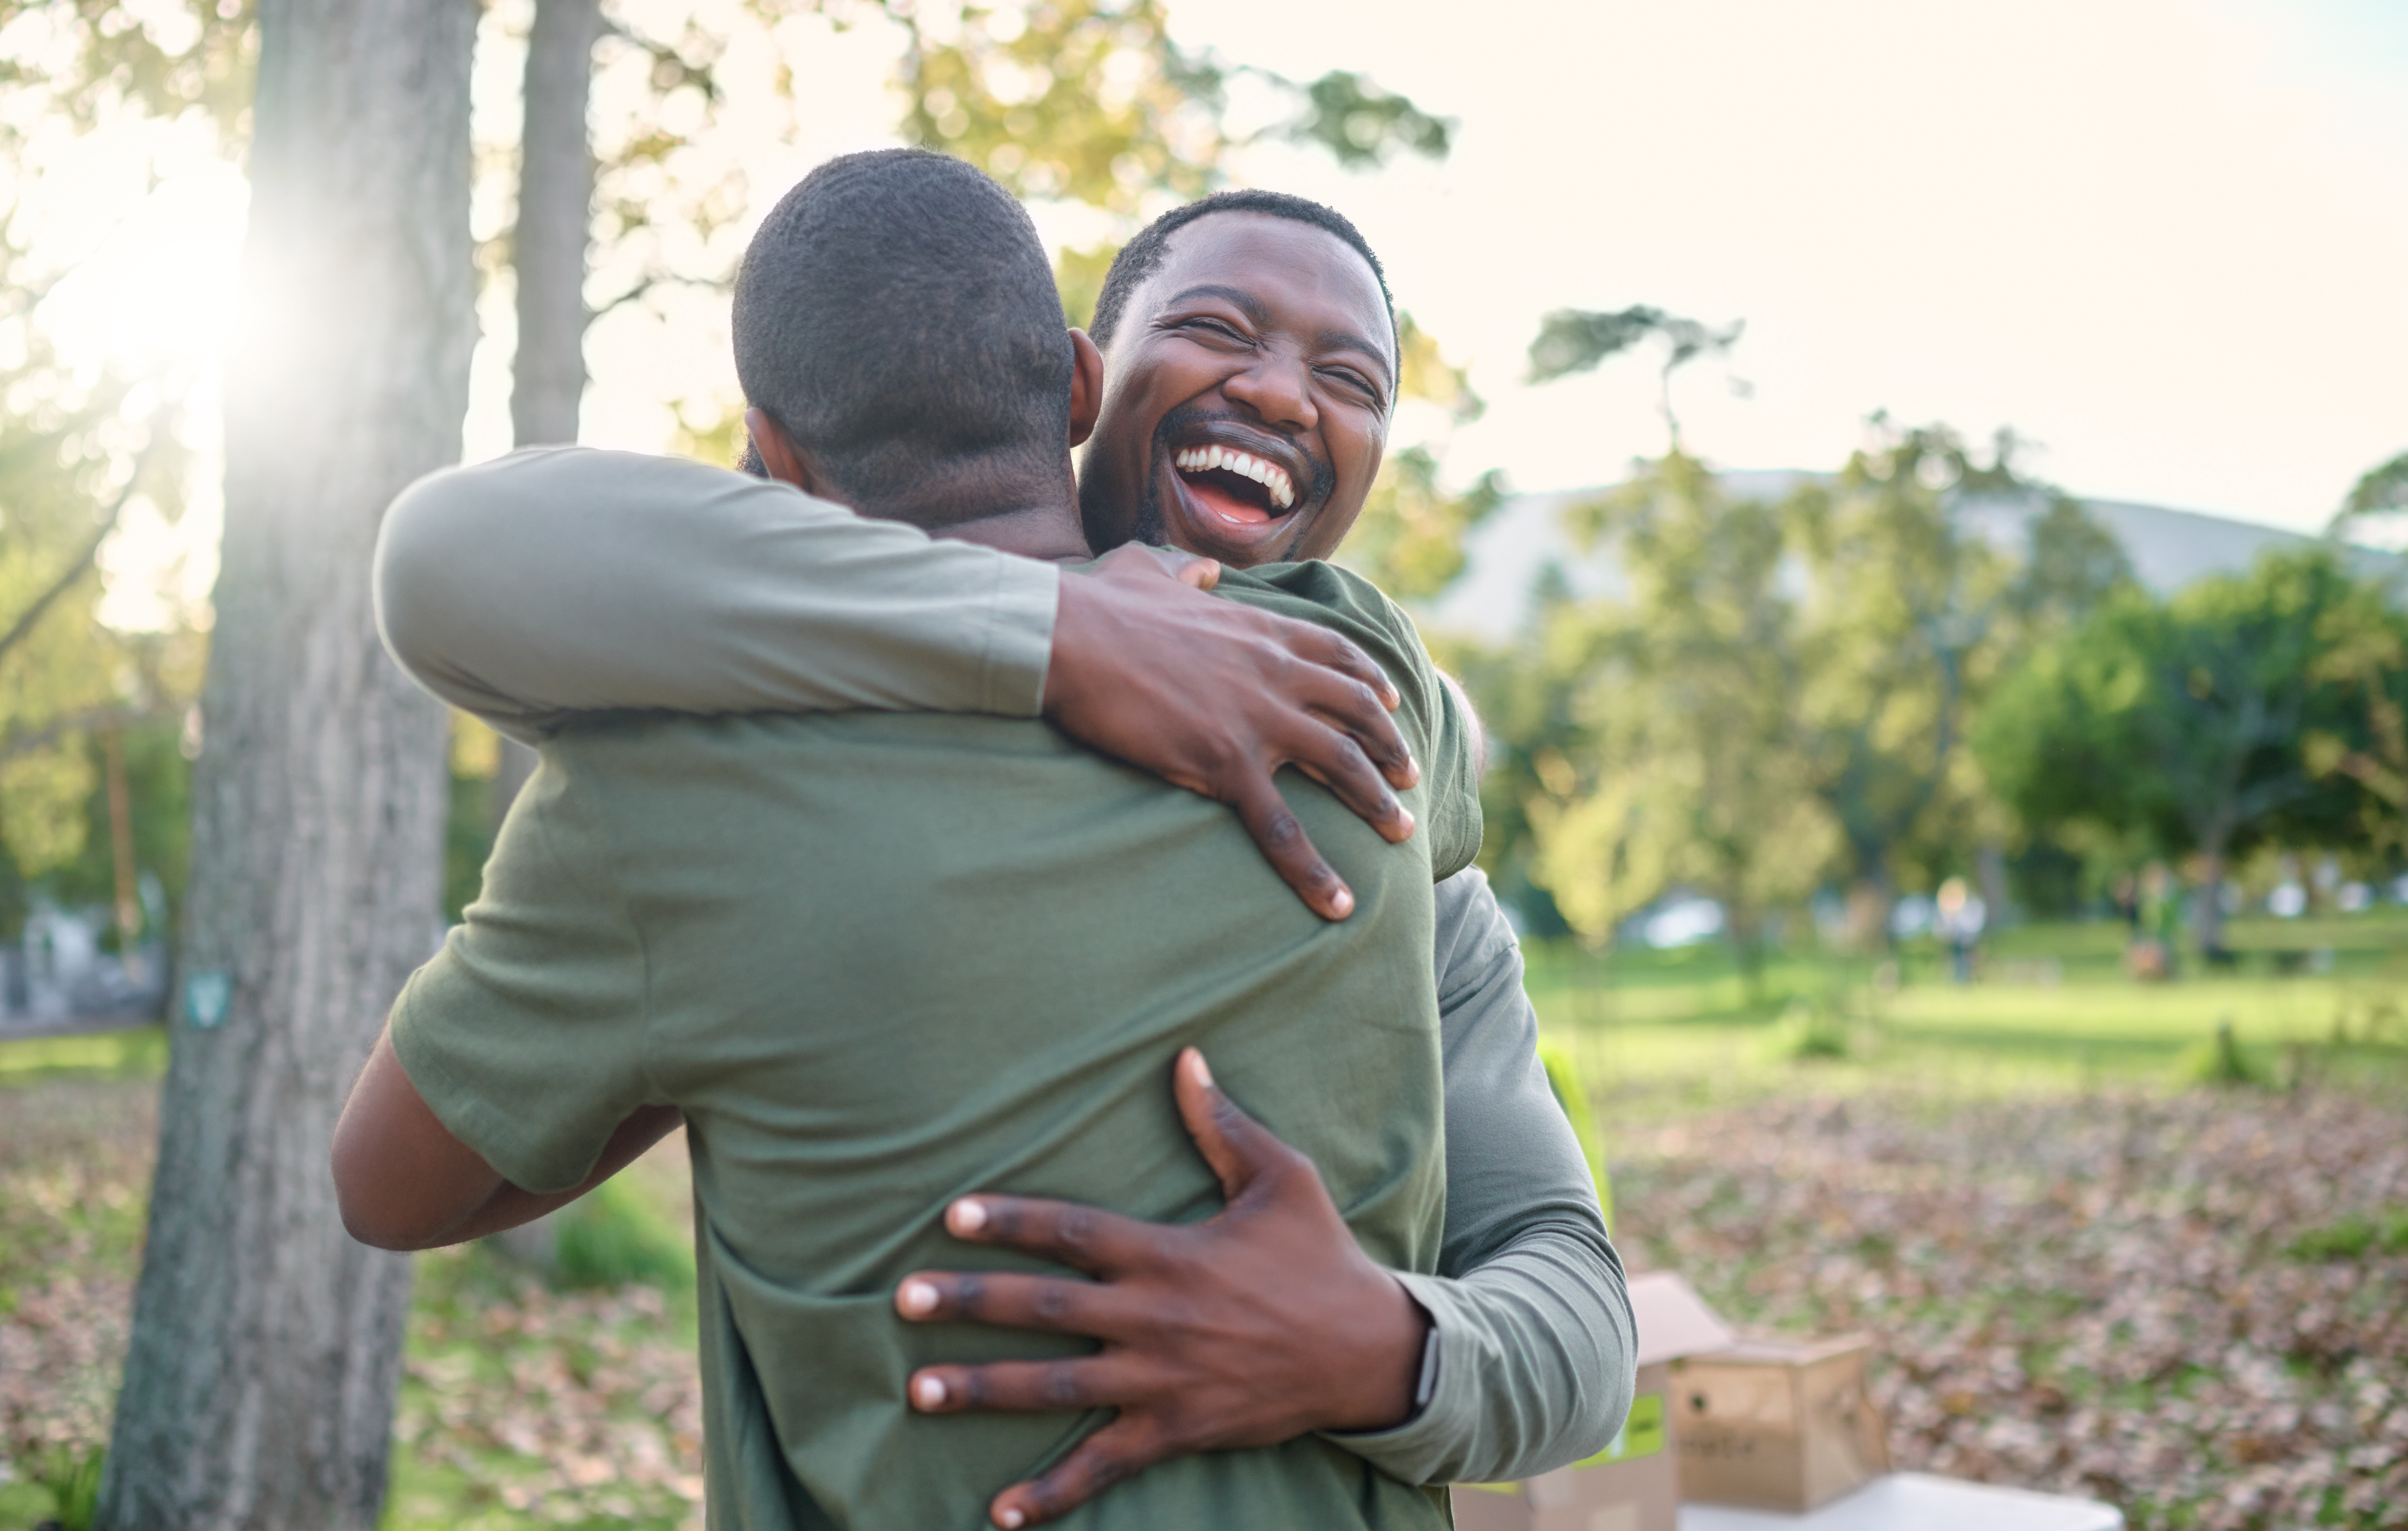 Charity, happy and hug with volunteer friends in a park for community, charity or donation of time together. Support, teamwork or sustainability with a black man and friend hugging outdoor in nature.